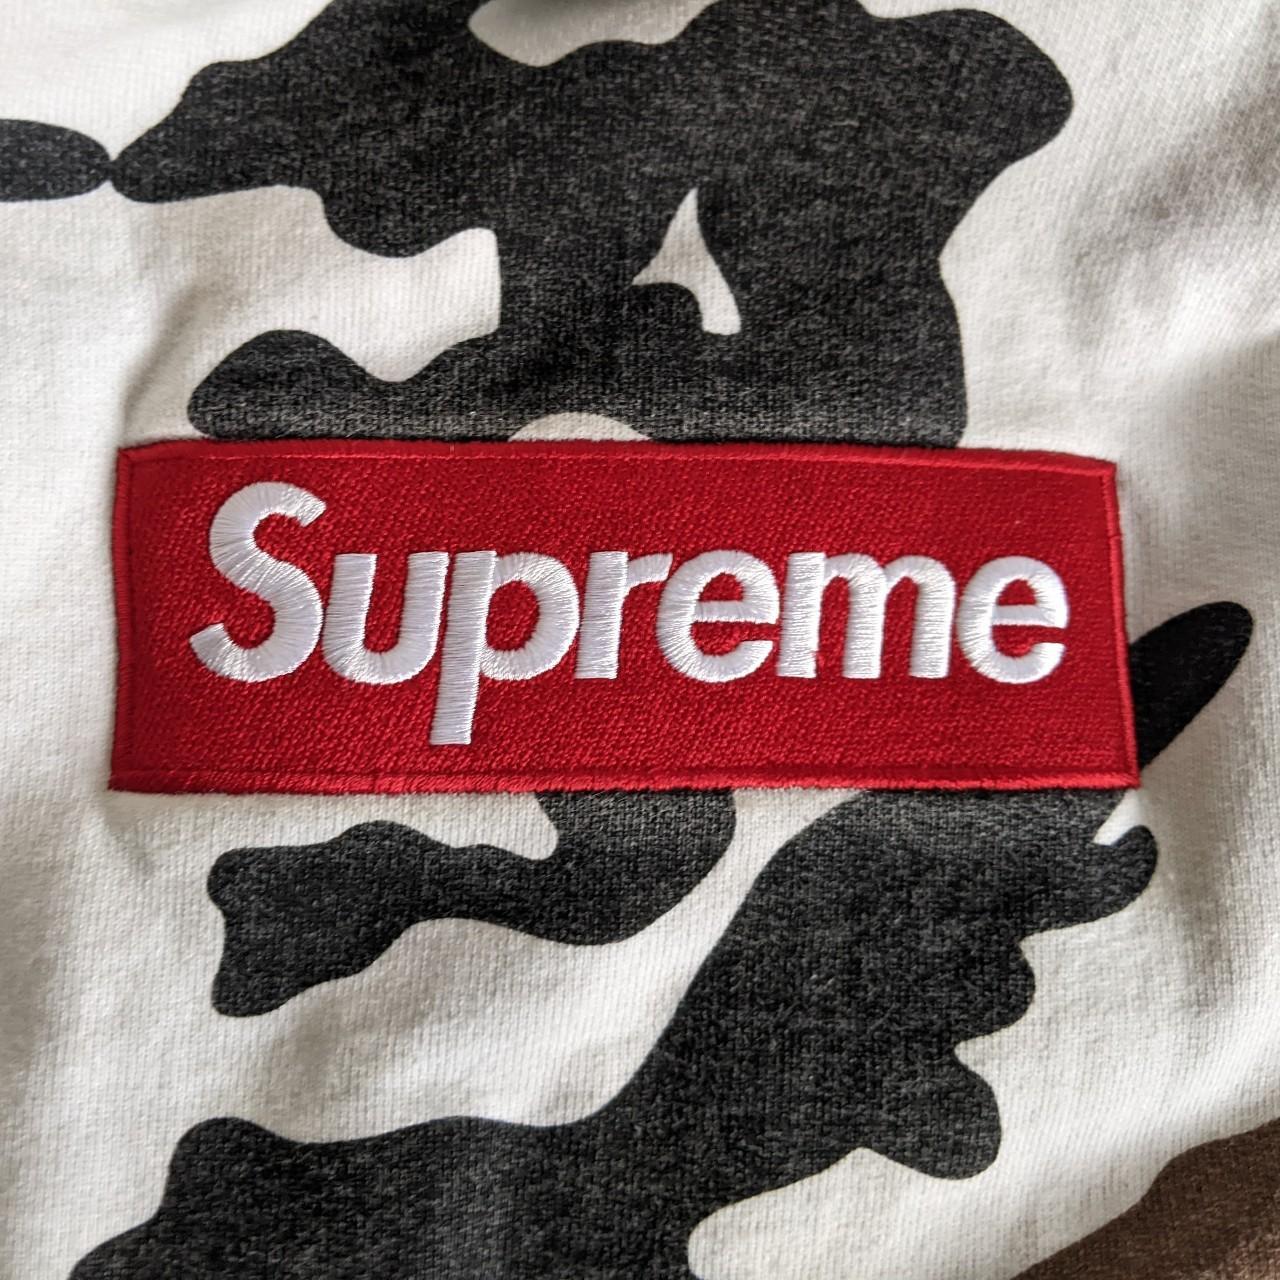 Supreme Brooklyn Camo zip pullover Only worn for - Depop